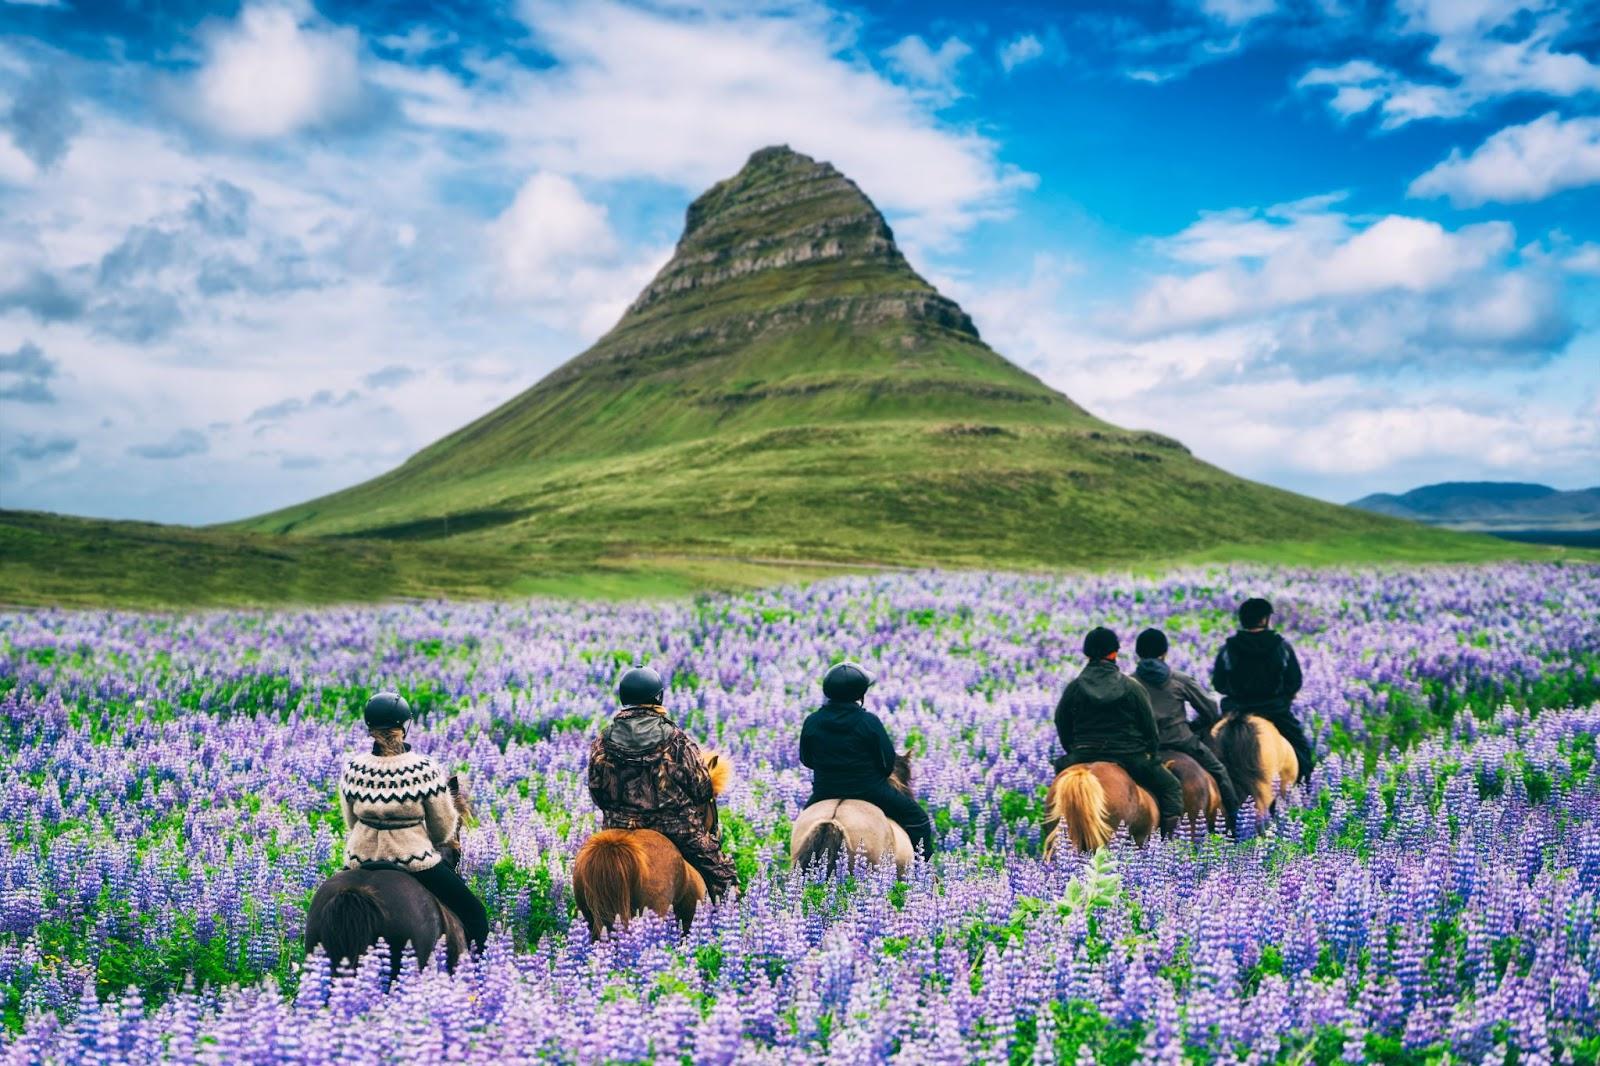 6 people on a pony trading adventure in Iceland. 